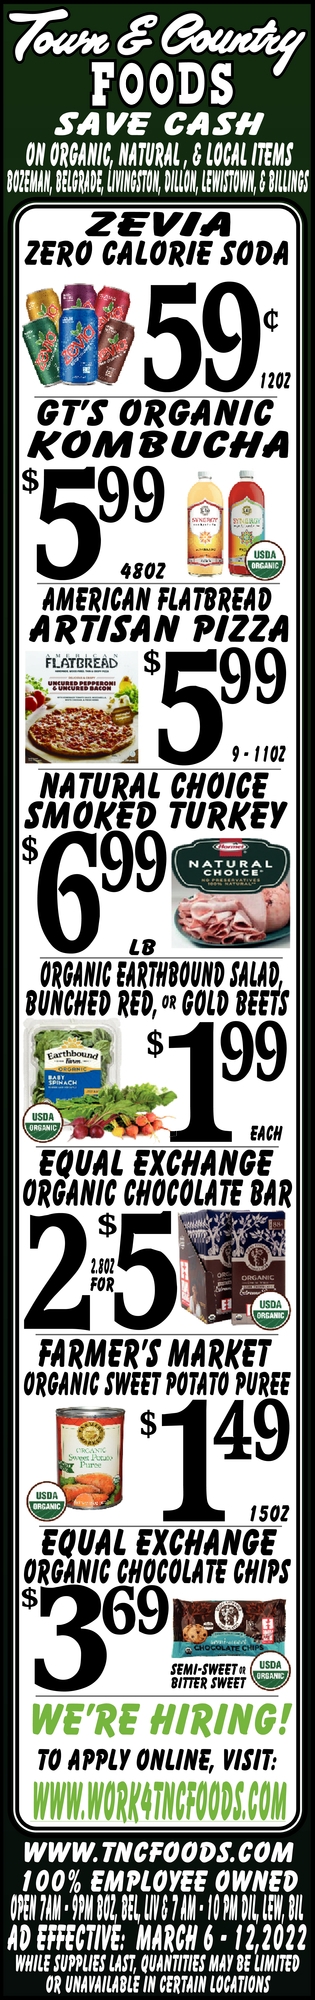 Save Cash on Organic, Natural & Local Items